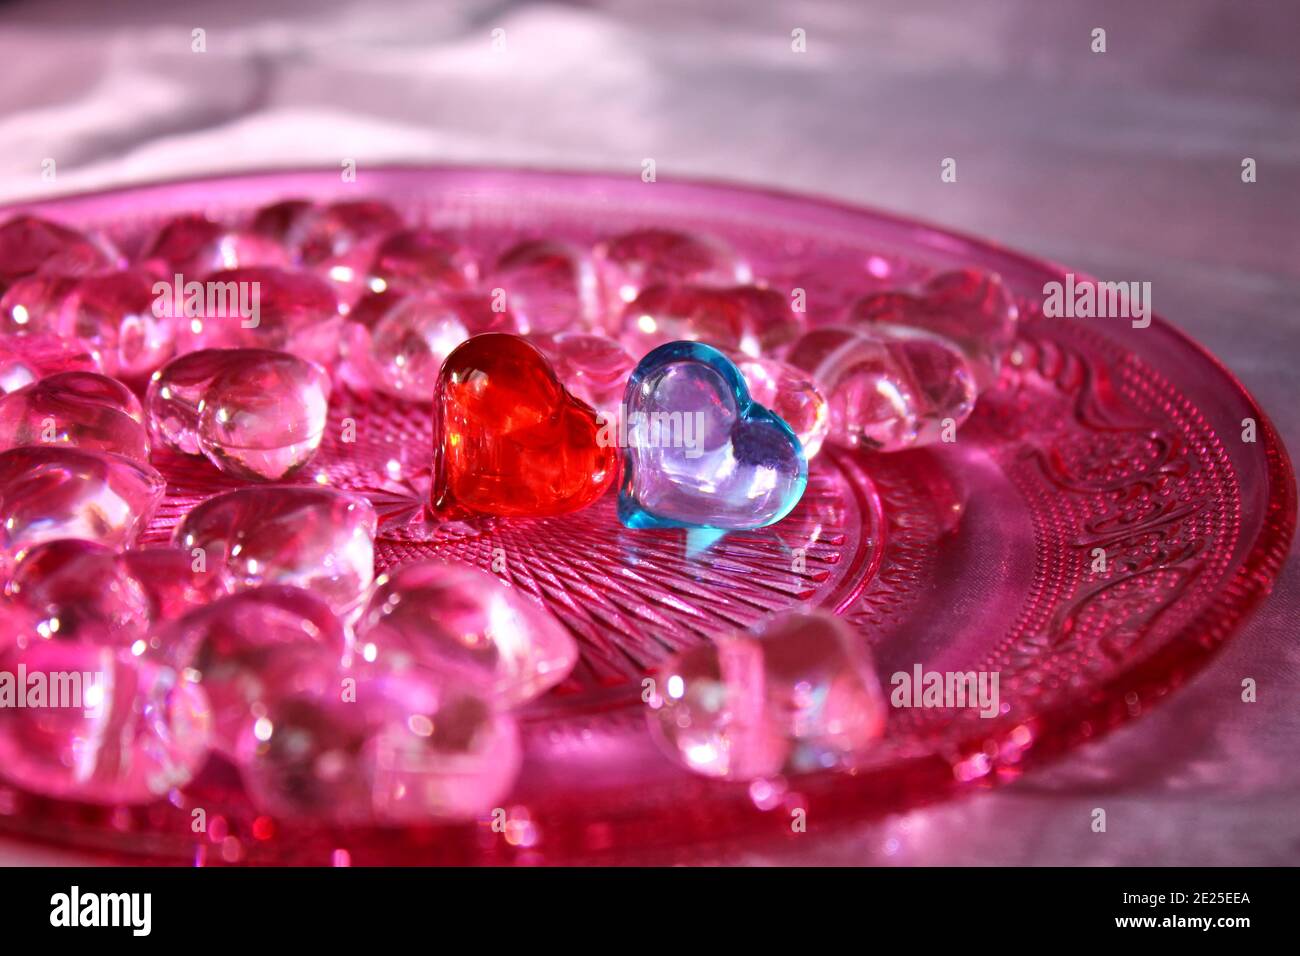 A red and a blue glass heart surrounded by pink hearts on a pink glass plate with ornament pattern. Stock Photo